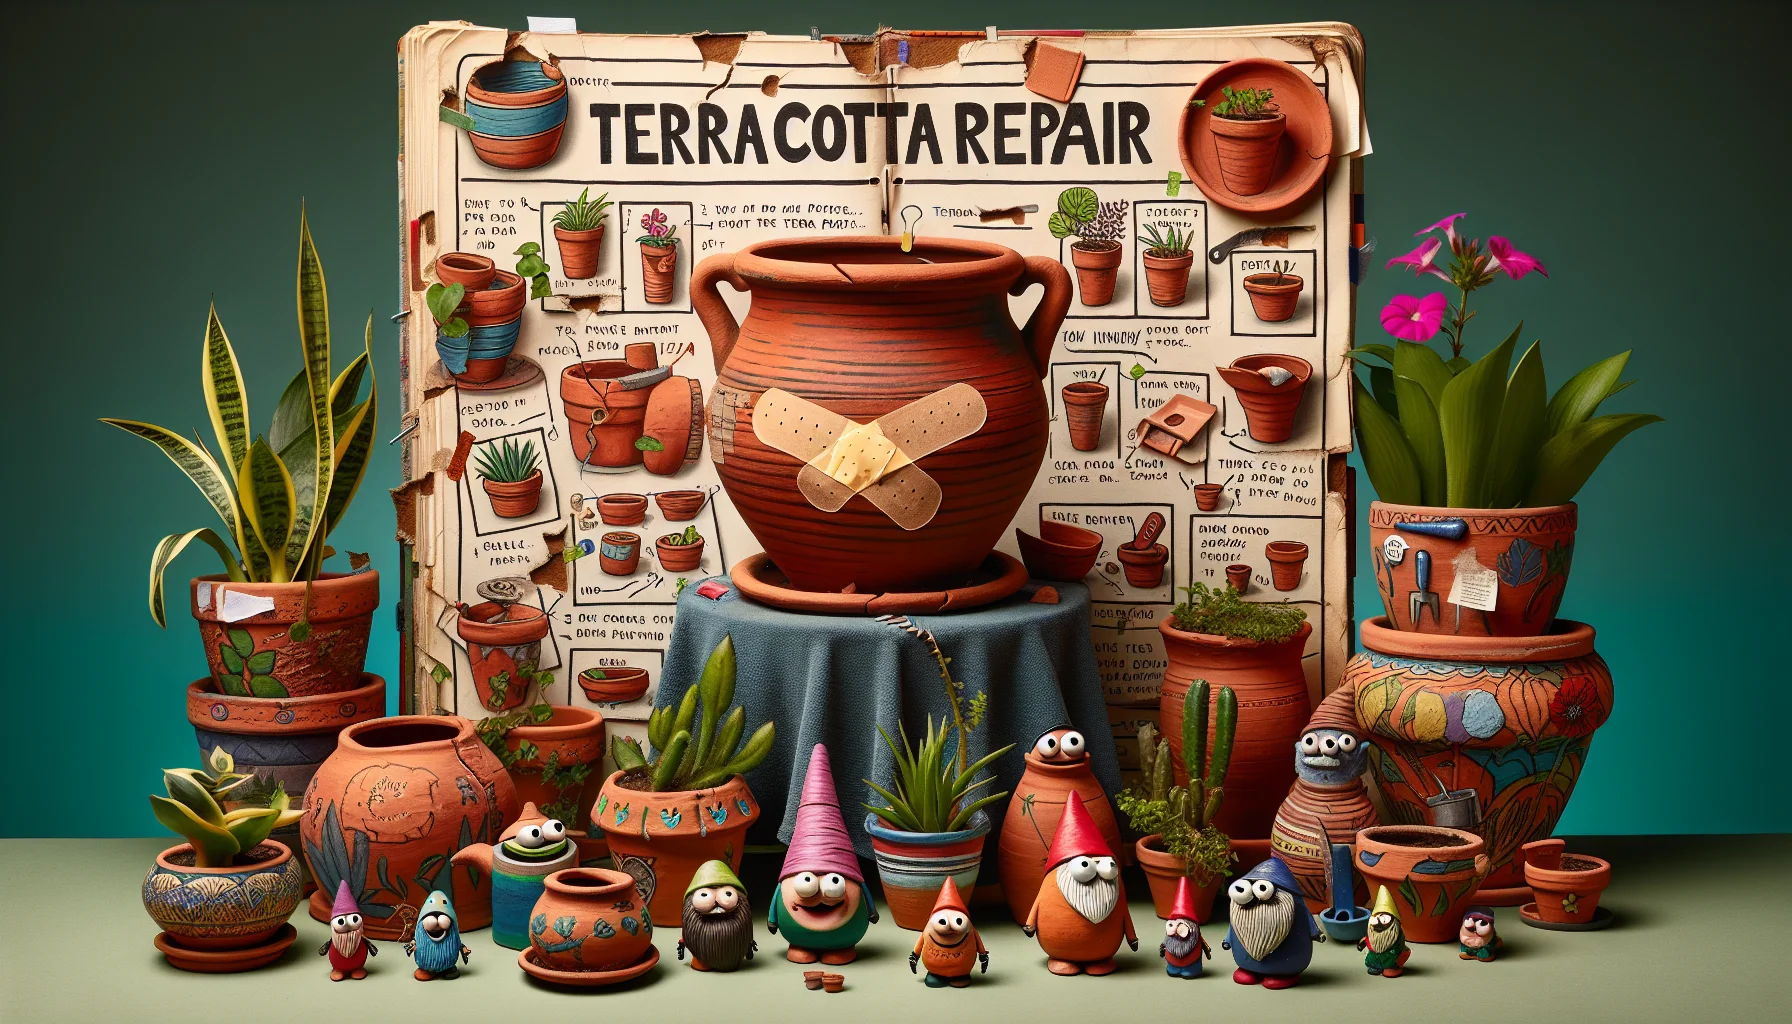 Create a thoughtfully composed scene that humorously promotes the enjoyment of gardening. In the center, there's a tattered and well-loved Terra Cotta Repair Guide, brimming with funny annotations and playful illustrations, perhaps even one of a terra cotta pot sporting a band-aid with a smile. Surrounding this, an array of vibrant plants and quirky terra cotta pots in various shapes and sizes. Some brandishing unique DIY repairs, such as colorful duct tape or glued-on pieces of other pot shards. Lastly, a couple of garden gnomes standing nearby, seemingly engrossed in reading the guide and attempting reparations themselves.